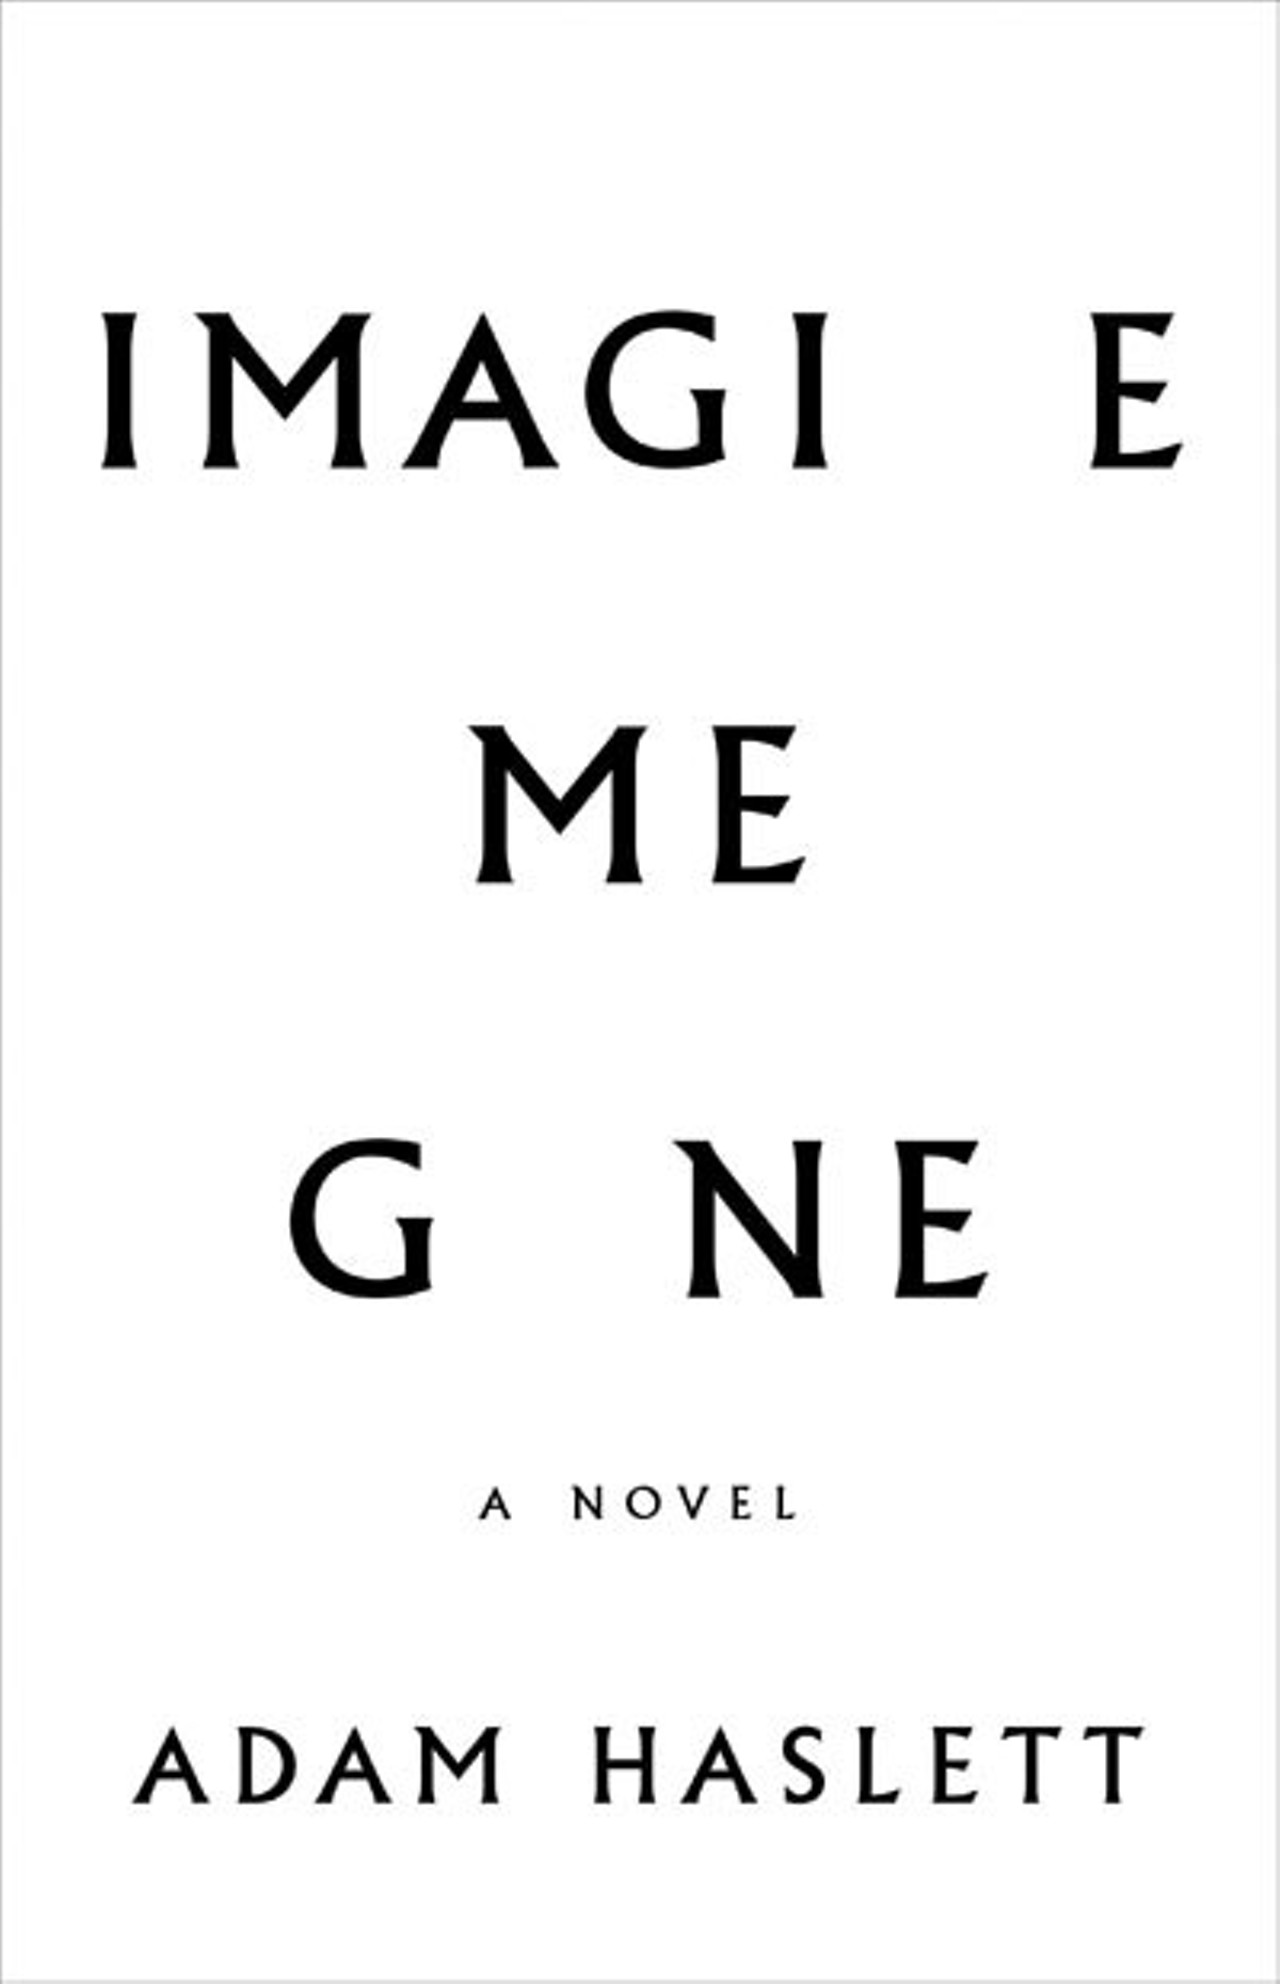 Imagine Me Gone by Adam Haslett -
A beautifully written novel exploring mental illness, Imagine Me Gone addresses not only those who suffer, but also the family members around them. Haslett's story of a father and son both dealing with severe anxiety and depression is at times a difficult read given the emotional topics involved, but a wholly worthy one nonetheless.